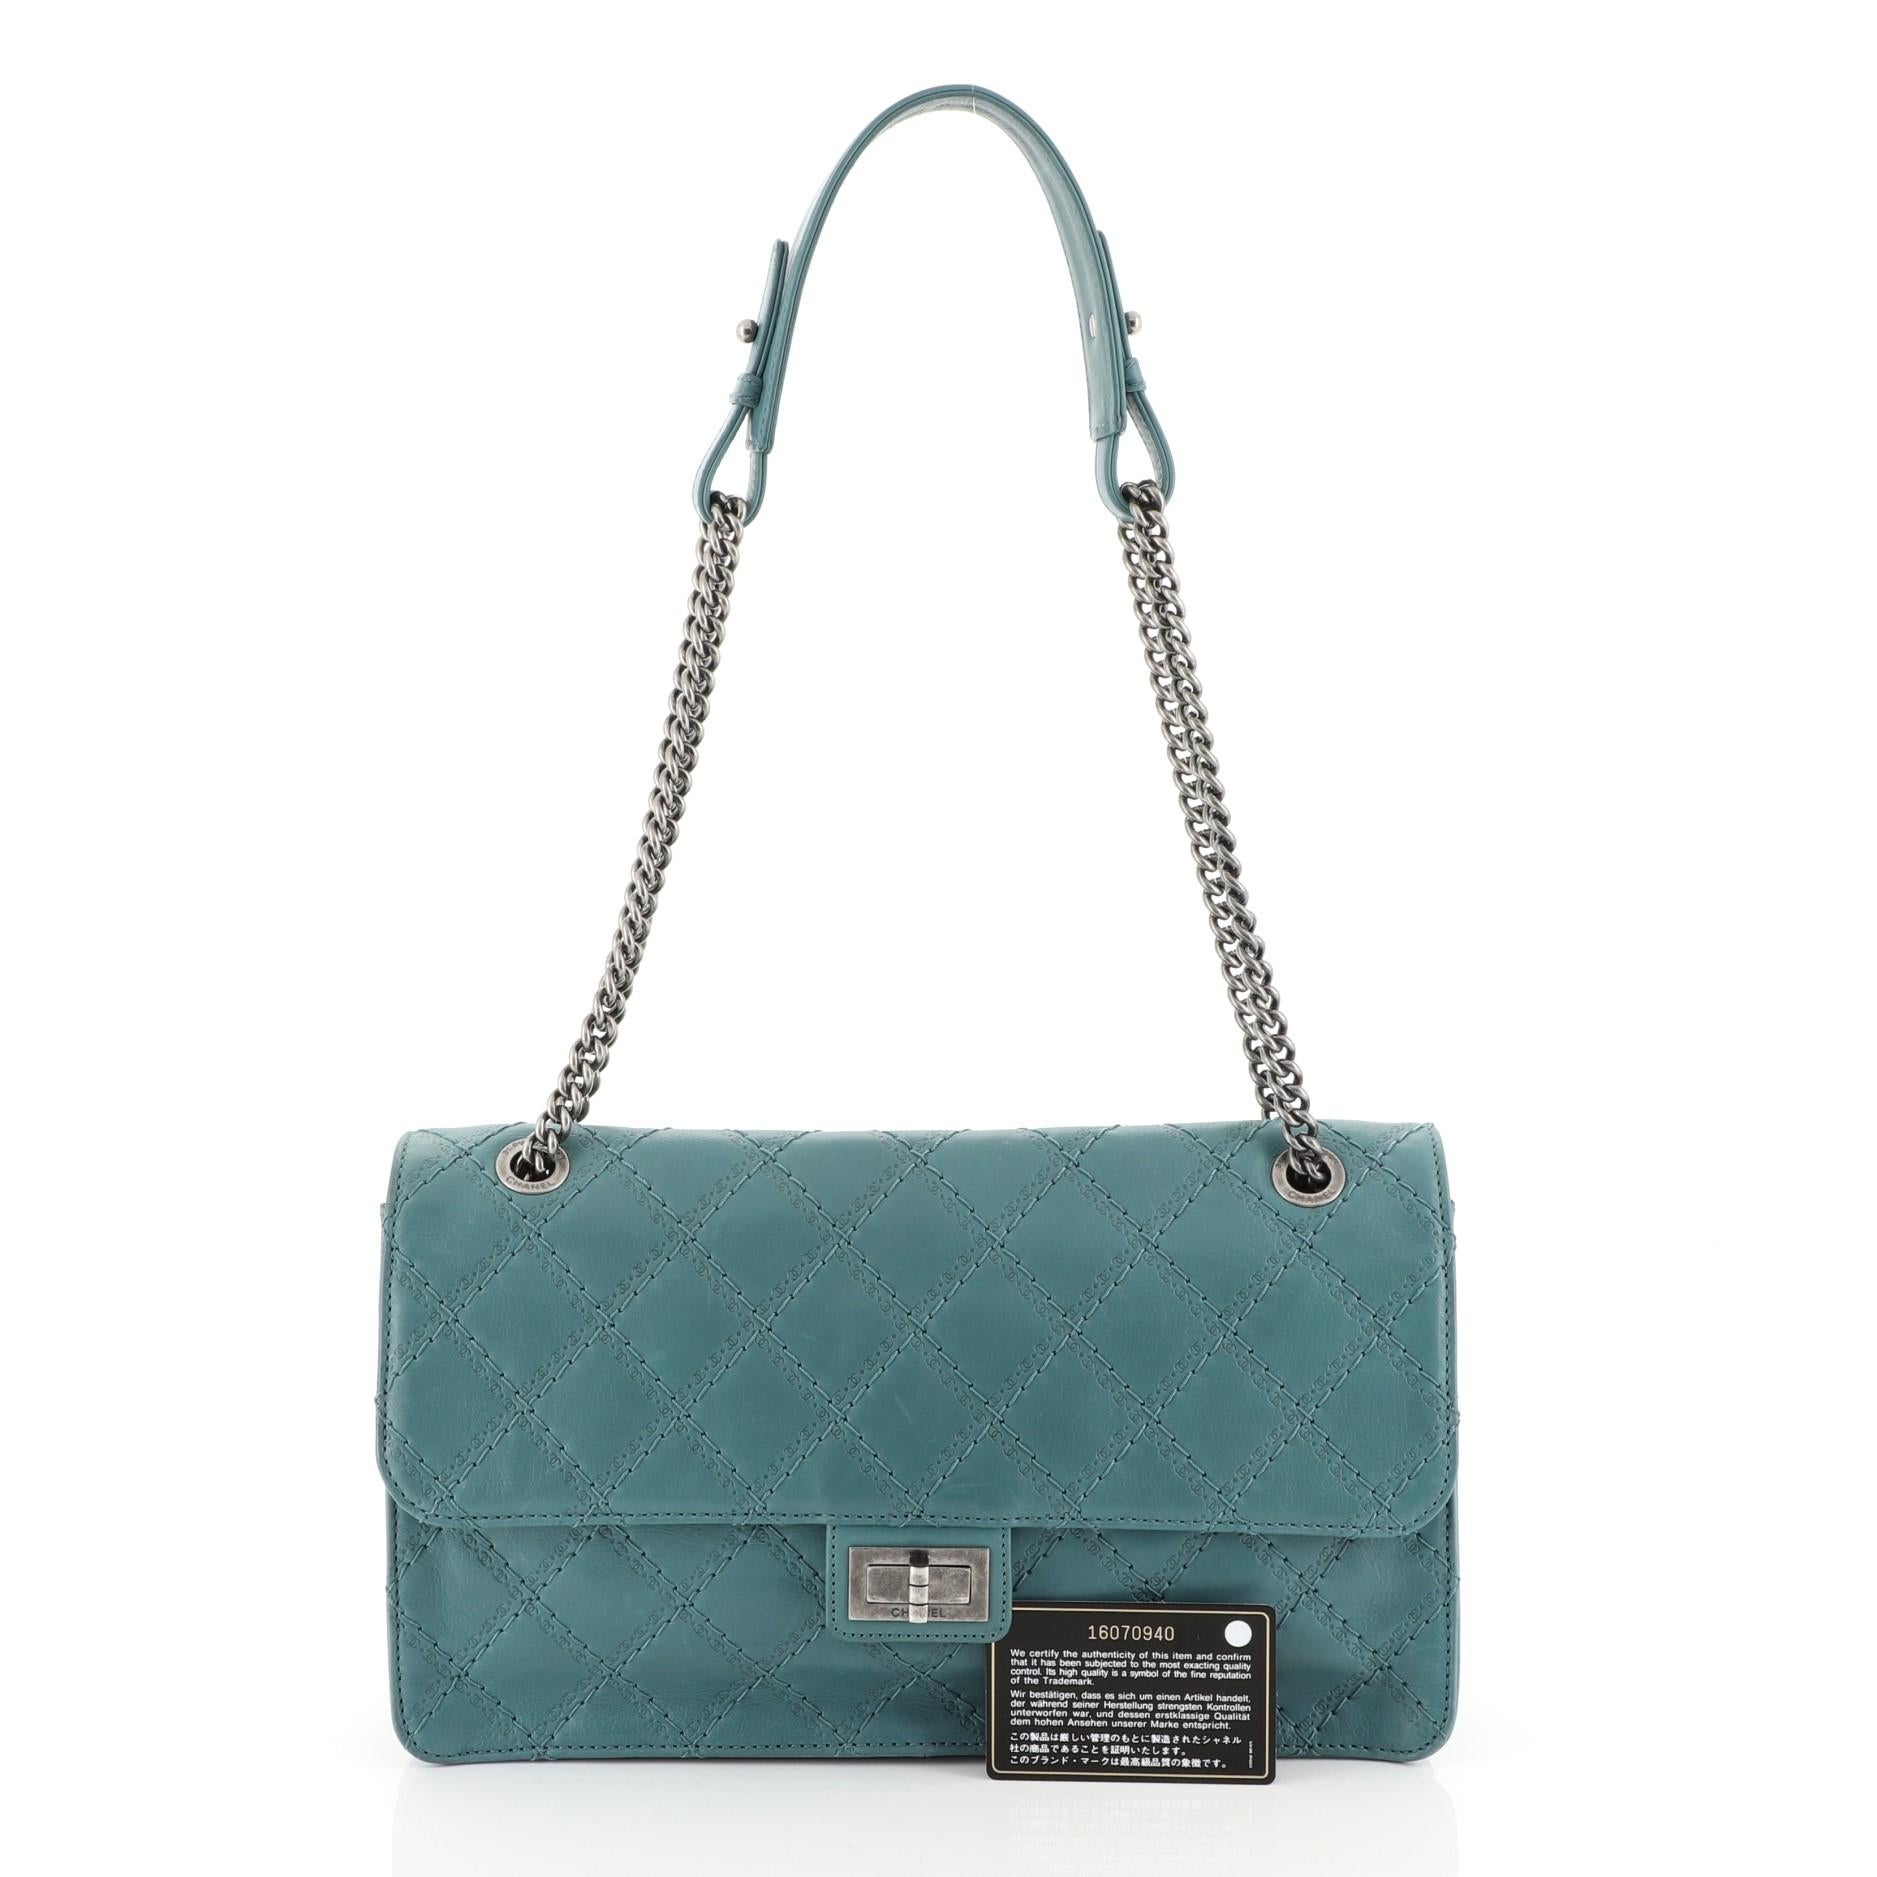 This Chanel Crave Reissue Flap Bag Quilted Calfskin Jumbo, crafted in green quilted calfskin leather, features reissue chain strap with leather pad, front flap and aged silver-tone hardware. Its mademoiselle turn-lock closure opens to a gray fabric